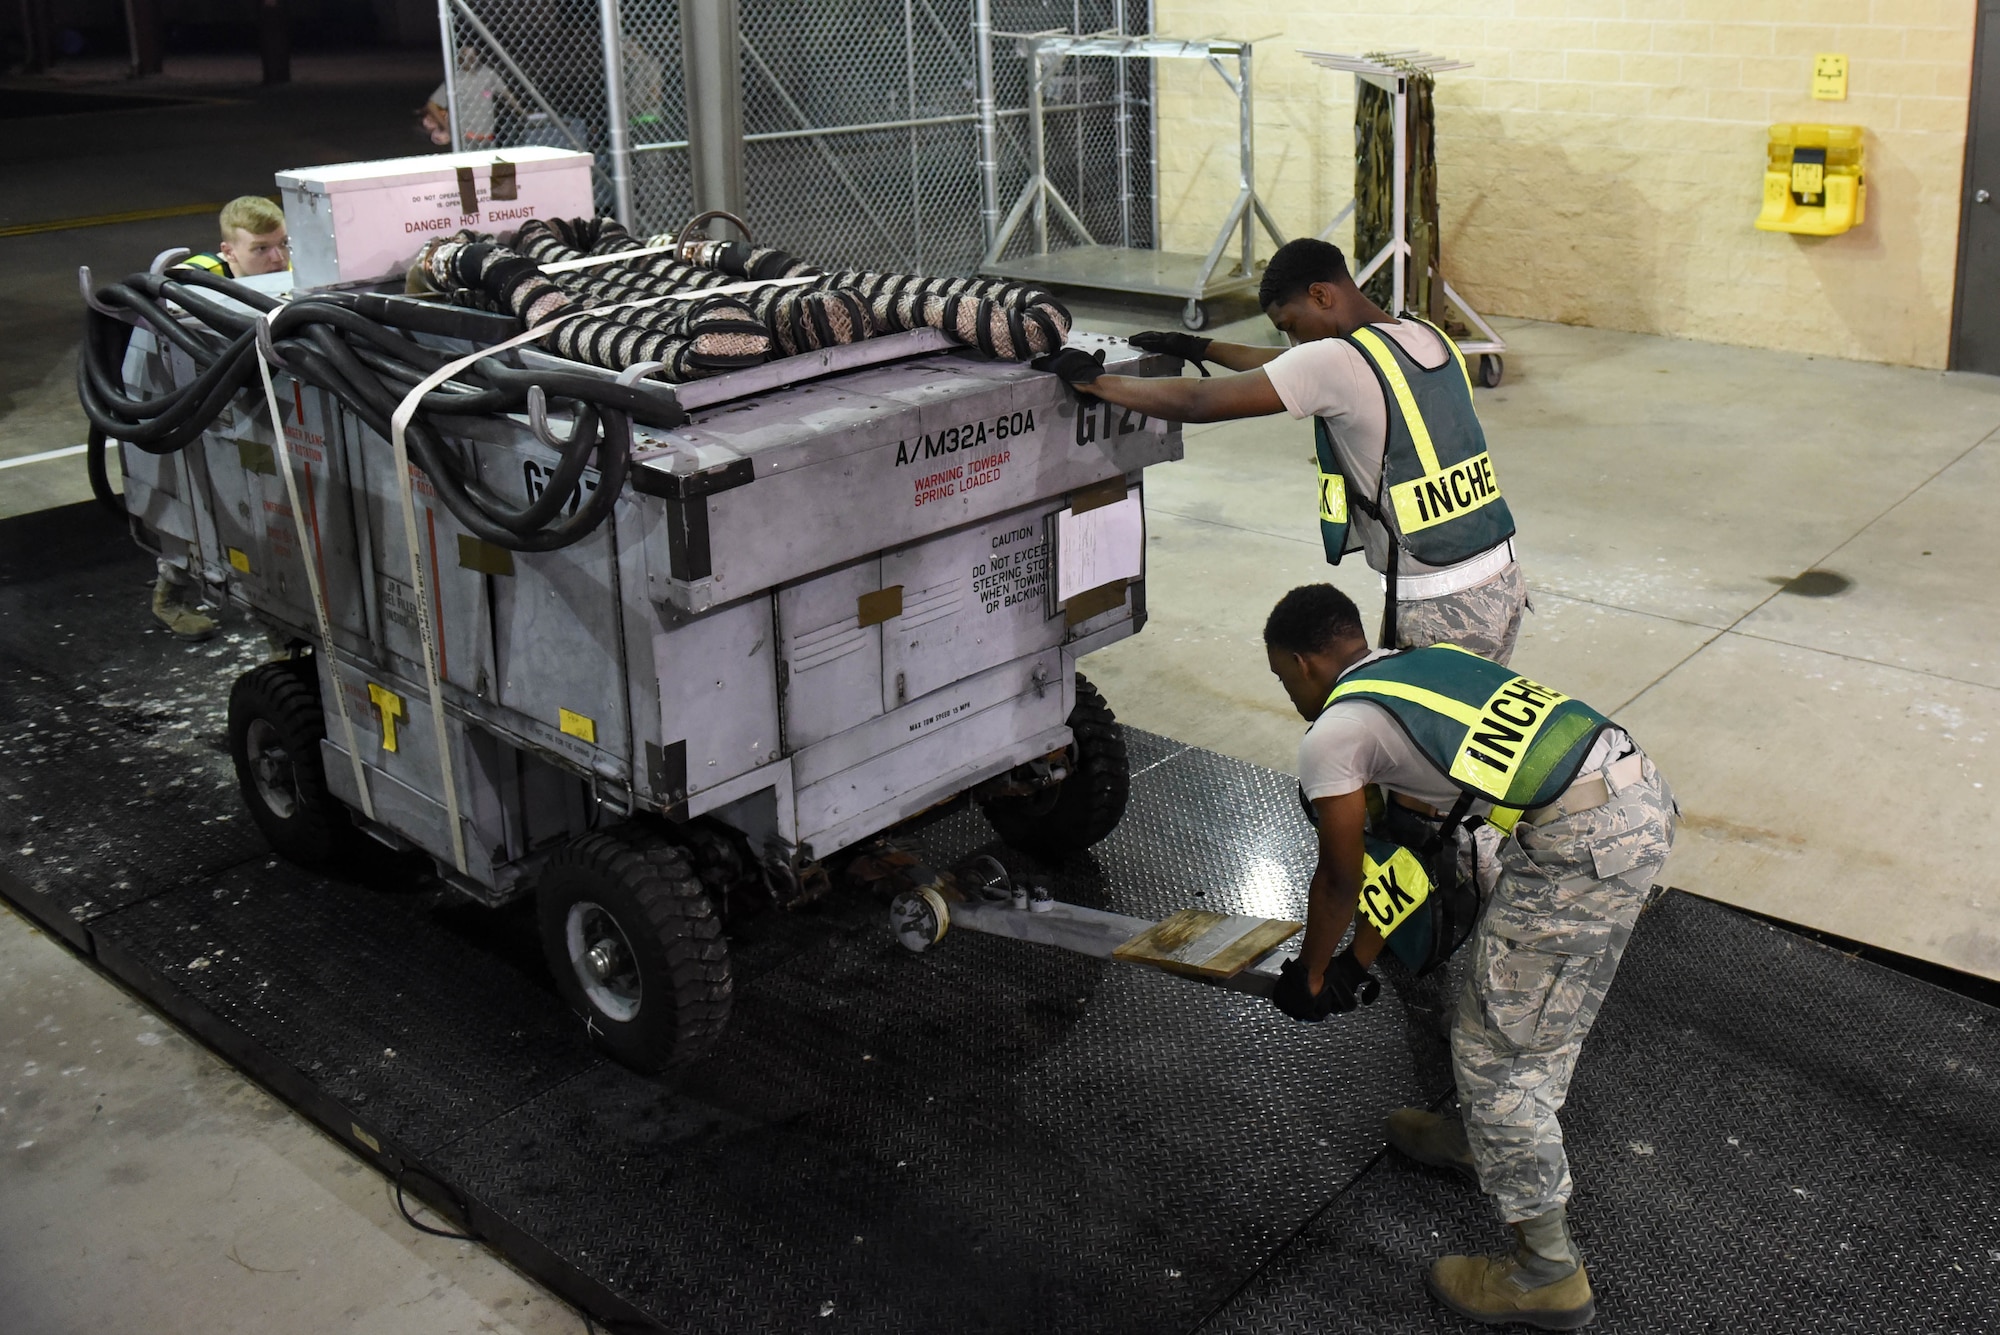 Members of the 4th Mission Support Group remove a generator cart from a weighing scale during exercise Thunderdome 17-02, July 20, 2017, at Seymour Johnson Air Force Base, North Carolina. The exercise allowed members of the 4th Fighter Wing to strengthen skills for real-world operations. (U.S. Air Force photo by Airman 1st Class Victoria Boyton)